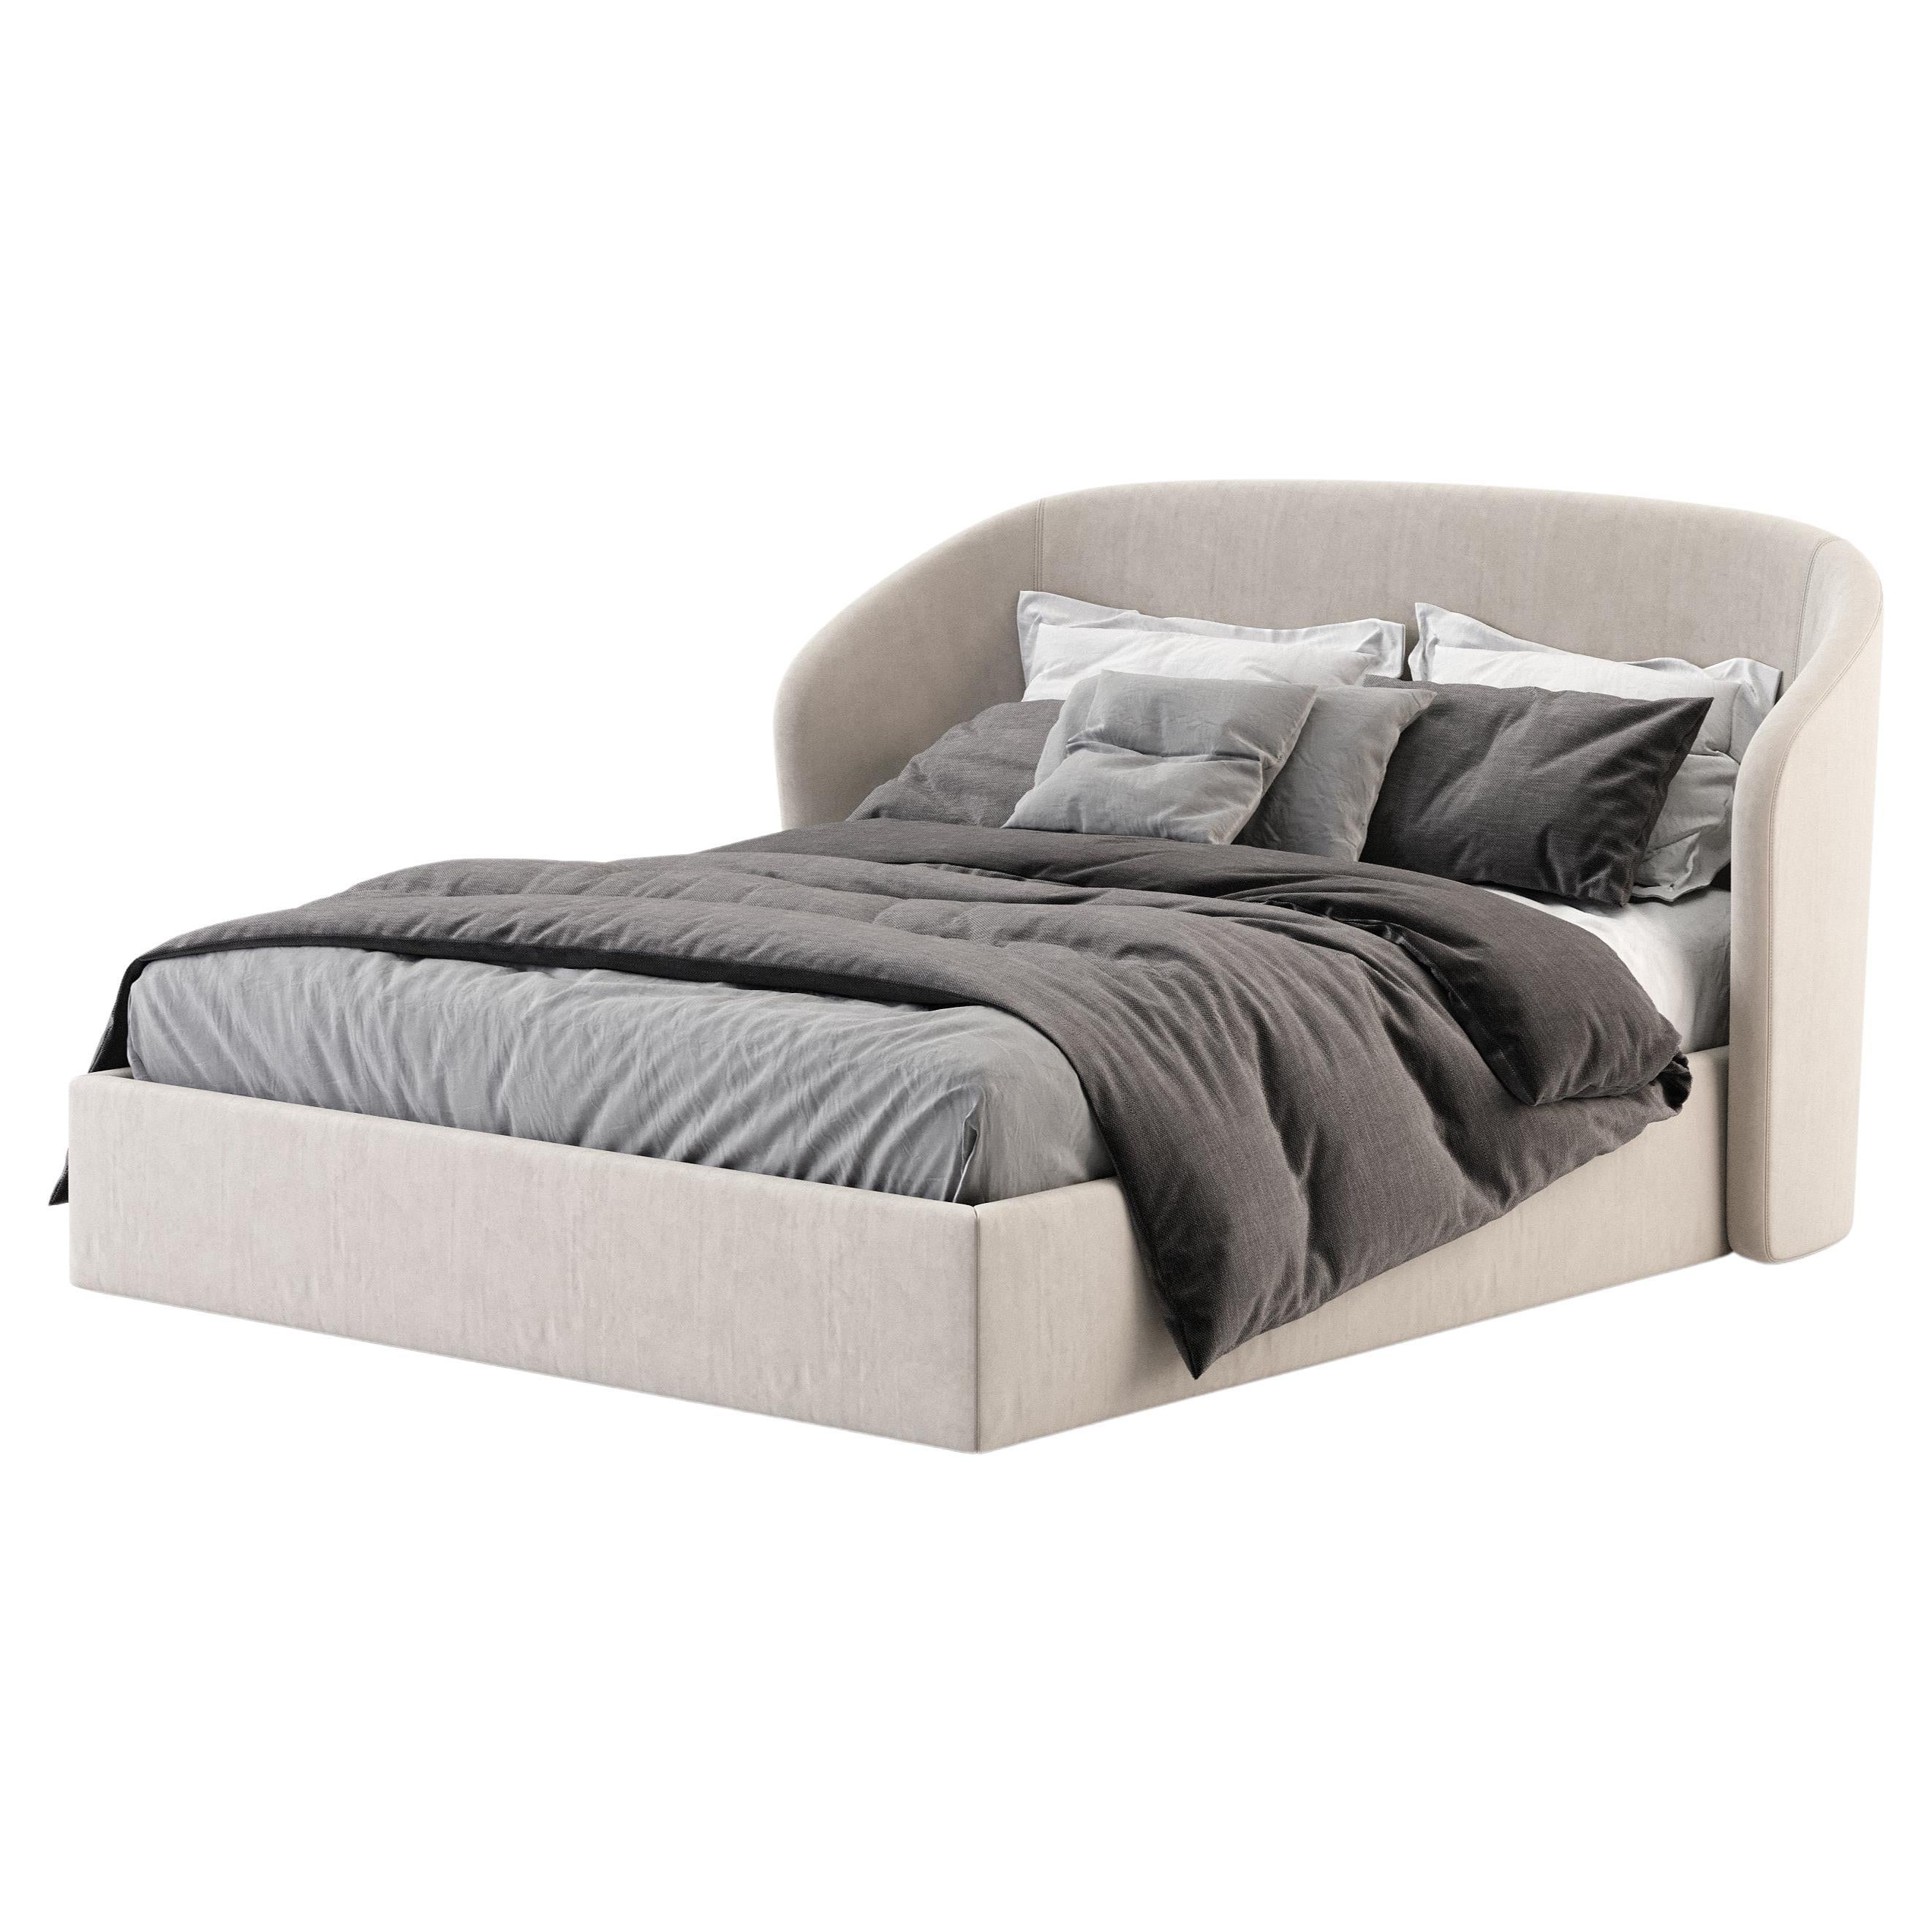 Queen Modern Fortune Bed Made with Textile, Handmade by Stylish Club